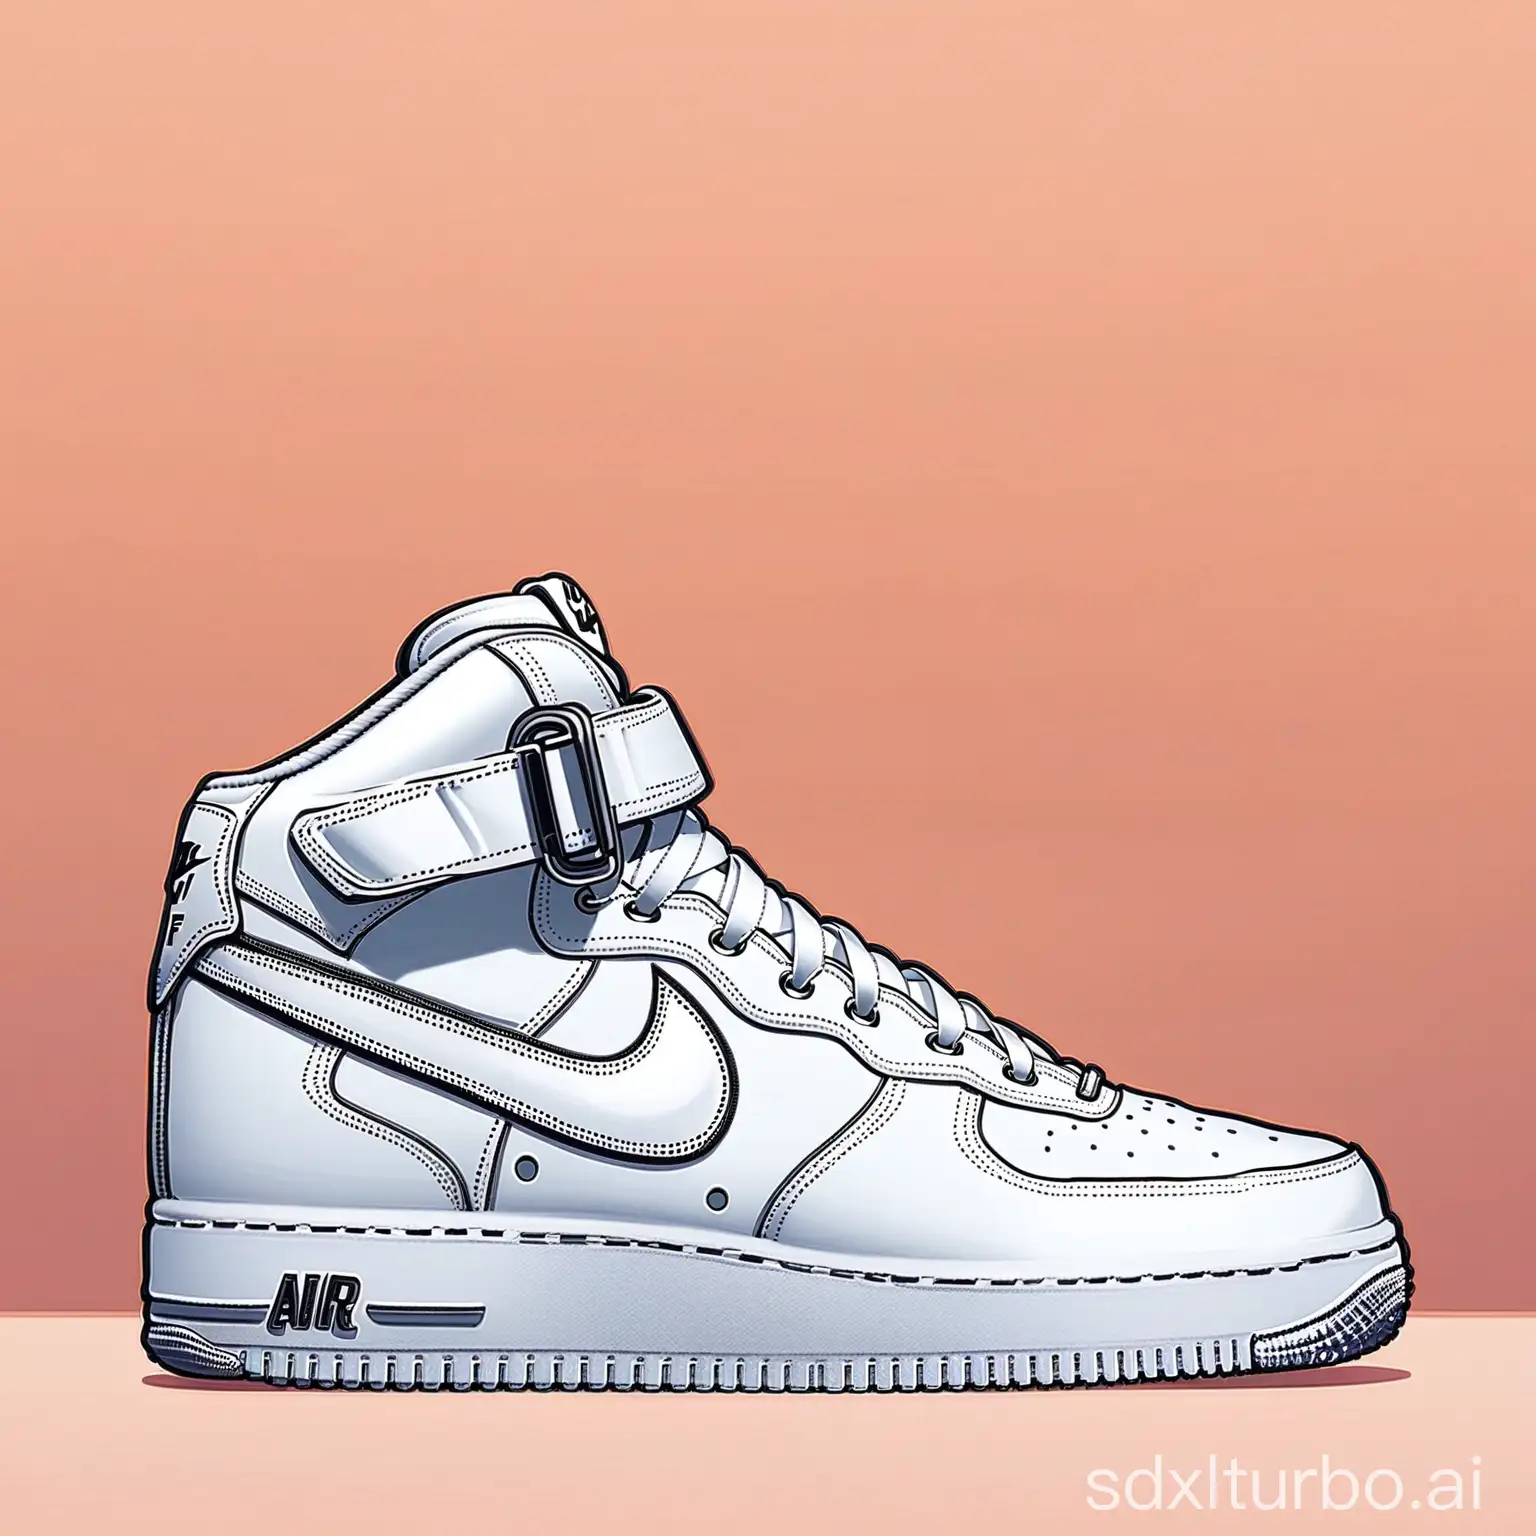 A pair of Air Force 1 shoes